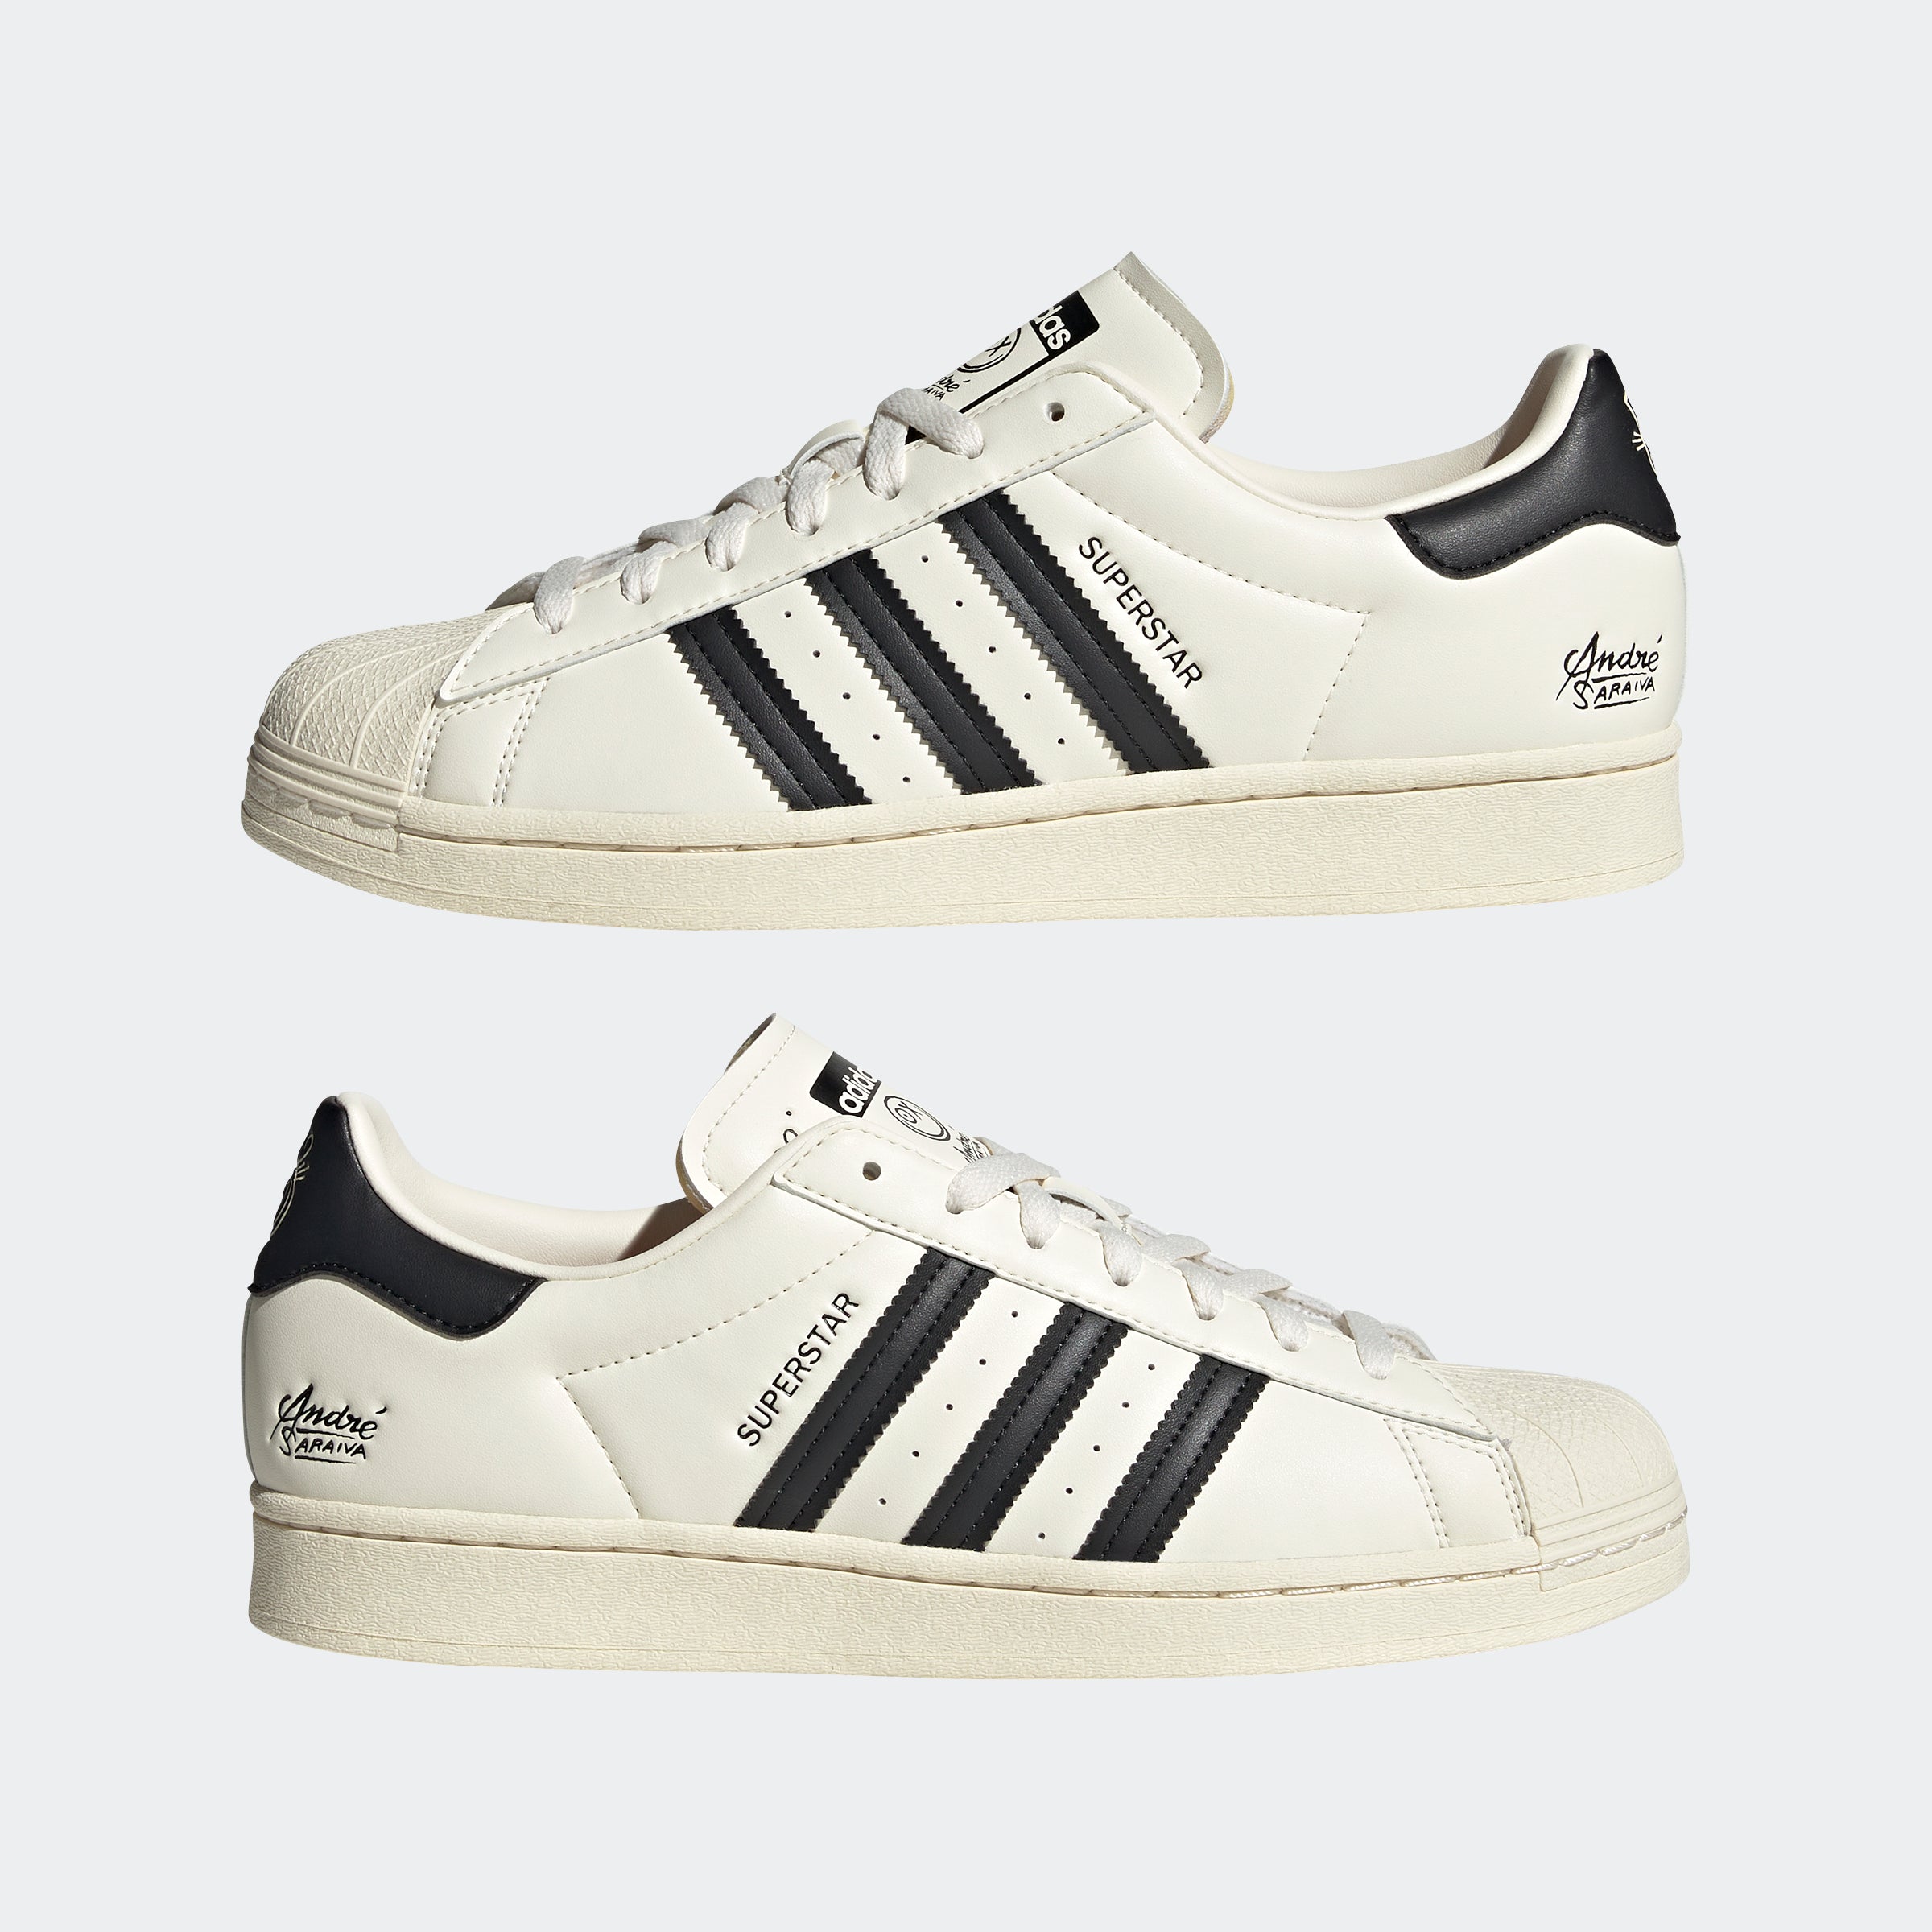 meer fragment schijf adidas Superstar x André Saraiva Shoes GZ2203 | Chicago City Sports